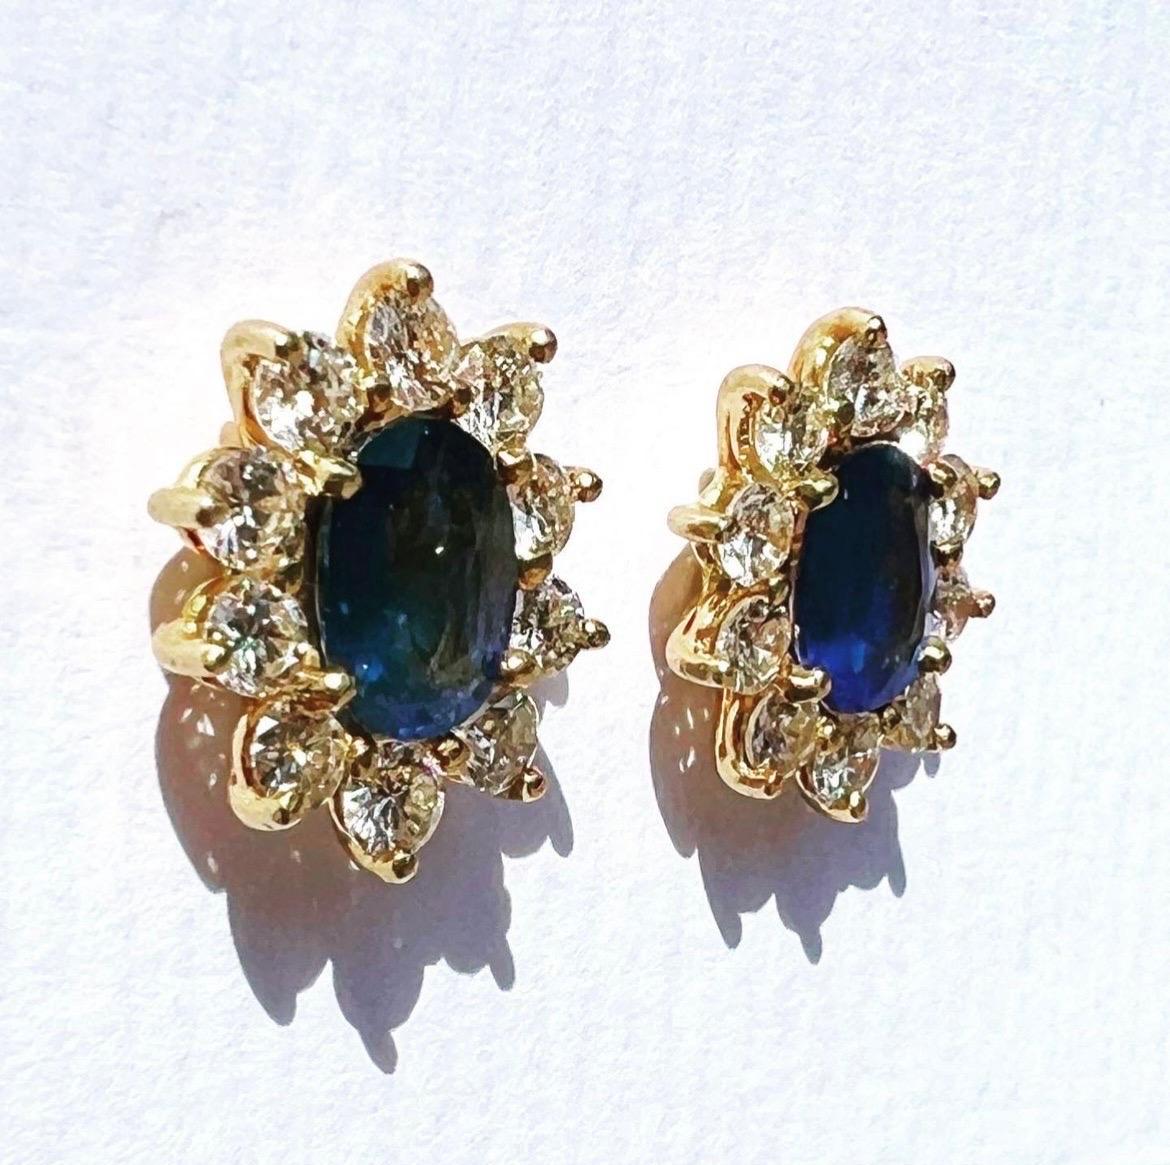 1970s sapphire diamonds 18 karat yellow gold stud cluster earrings.
Stud and clutch system.
Condition: Good.
Oval cut sapphire.
Brilliant cut diamond frame .
Diamond approximate carat weight: 1.2 carats. H-VS.
Sapphire approximate weight: 2.18